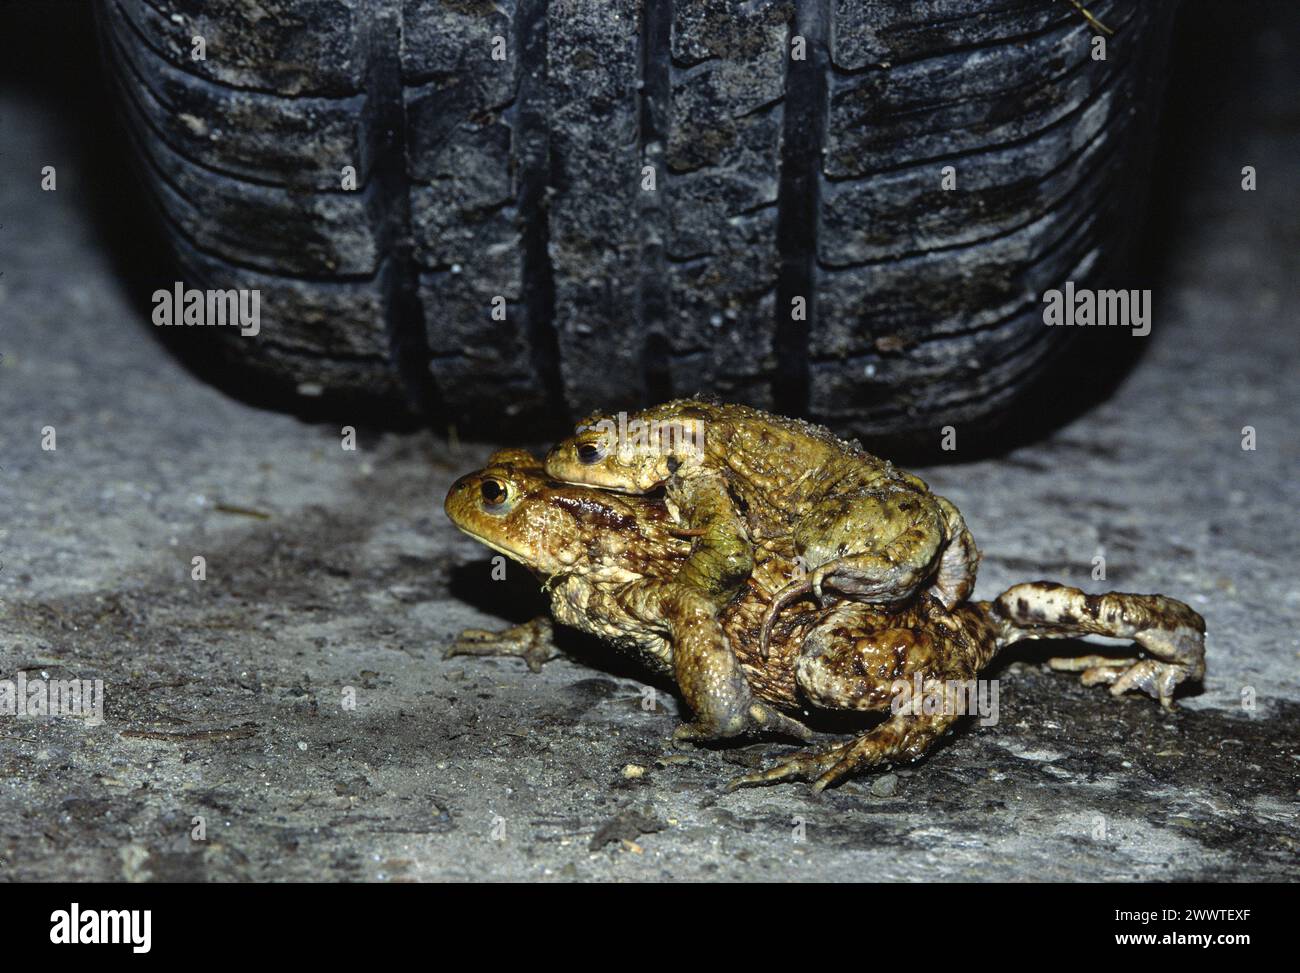 European common toad (Bufo bufo), Amphibian migration, pair on the road in front of a car tire, Germany Stock Photo